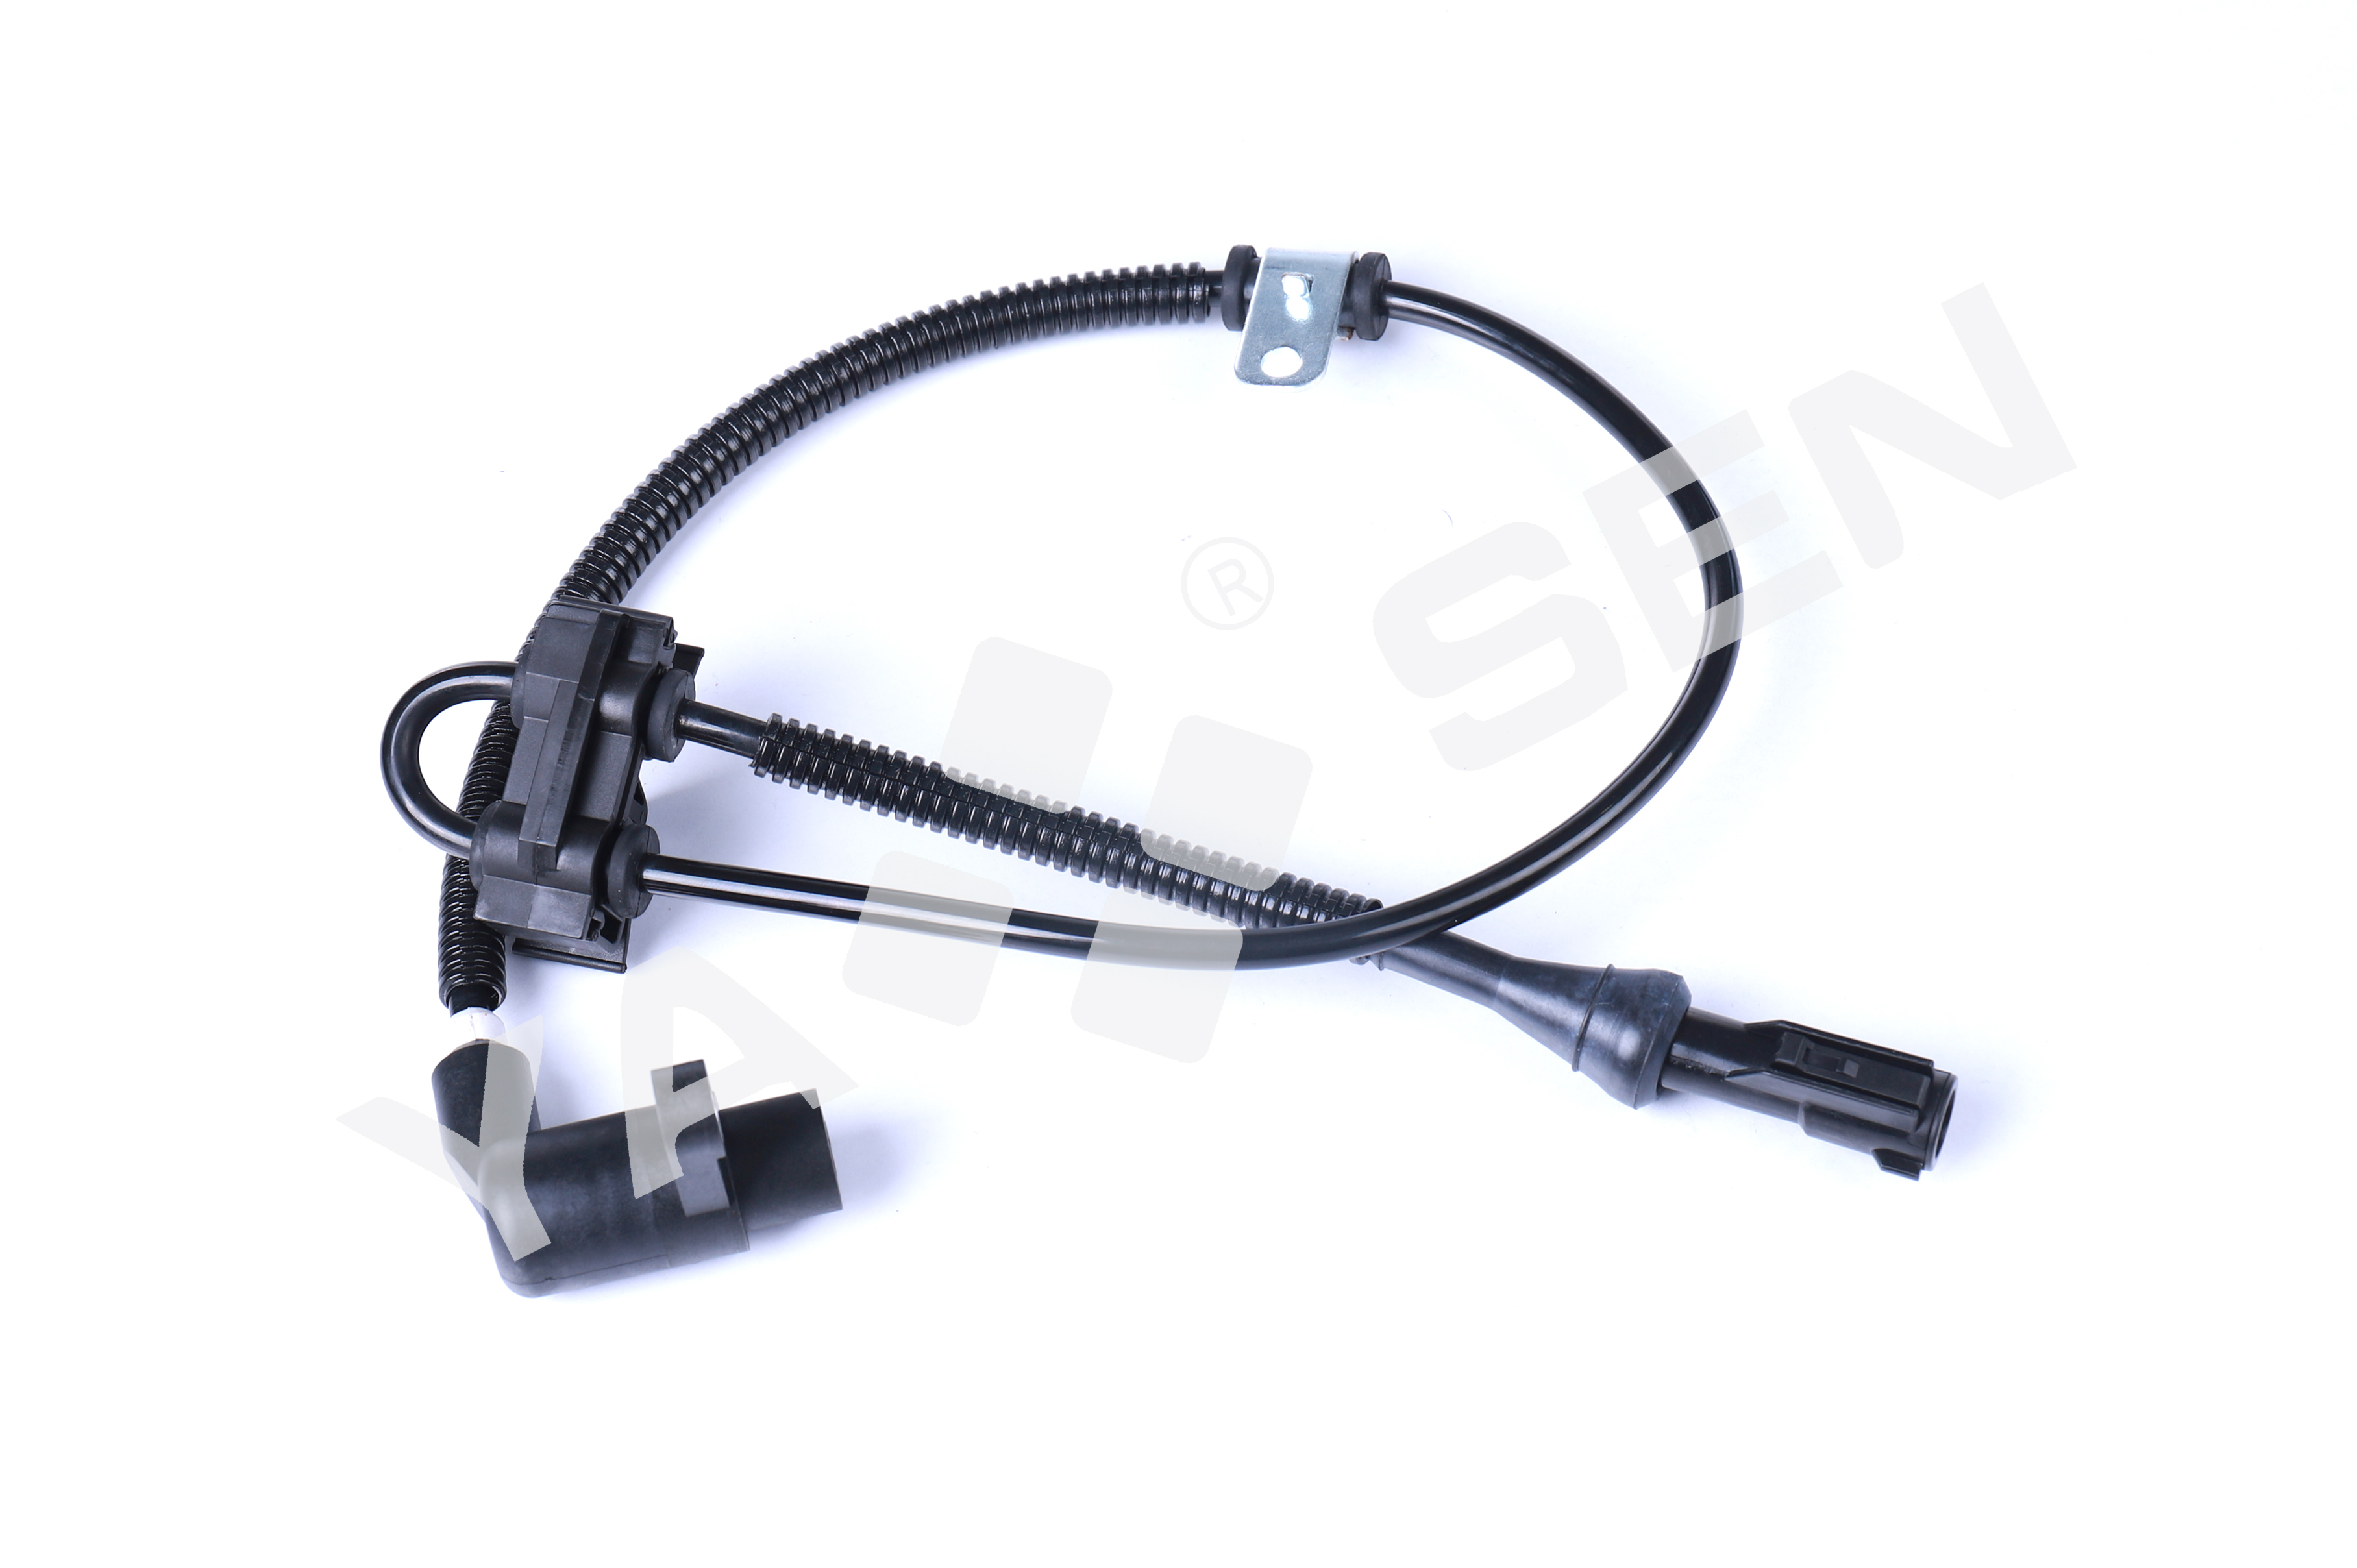 ABS Wheel Speed Sensor for FORD, ALS156 72-5686 BRAB108 19236213 256138 1406-256138 970-077 SU7593 ABS267 1802-305218 5S6060 970